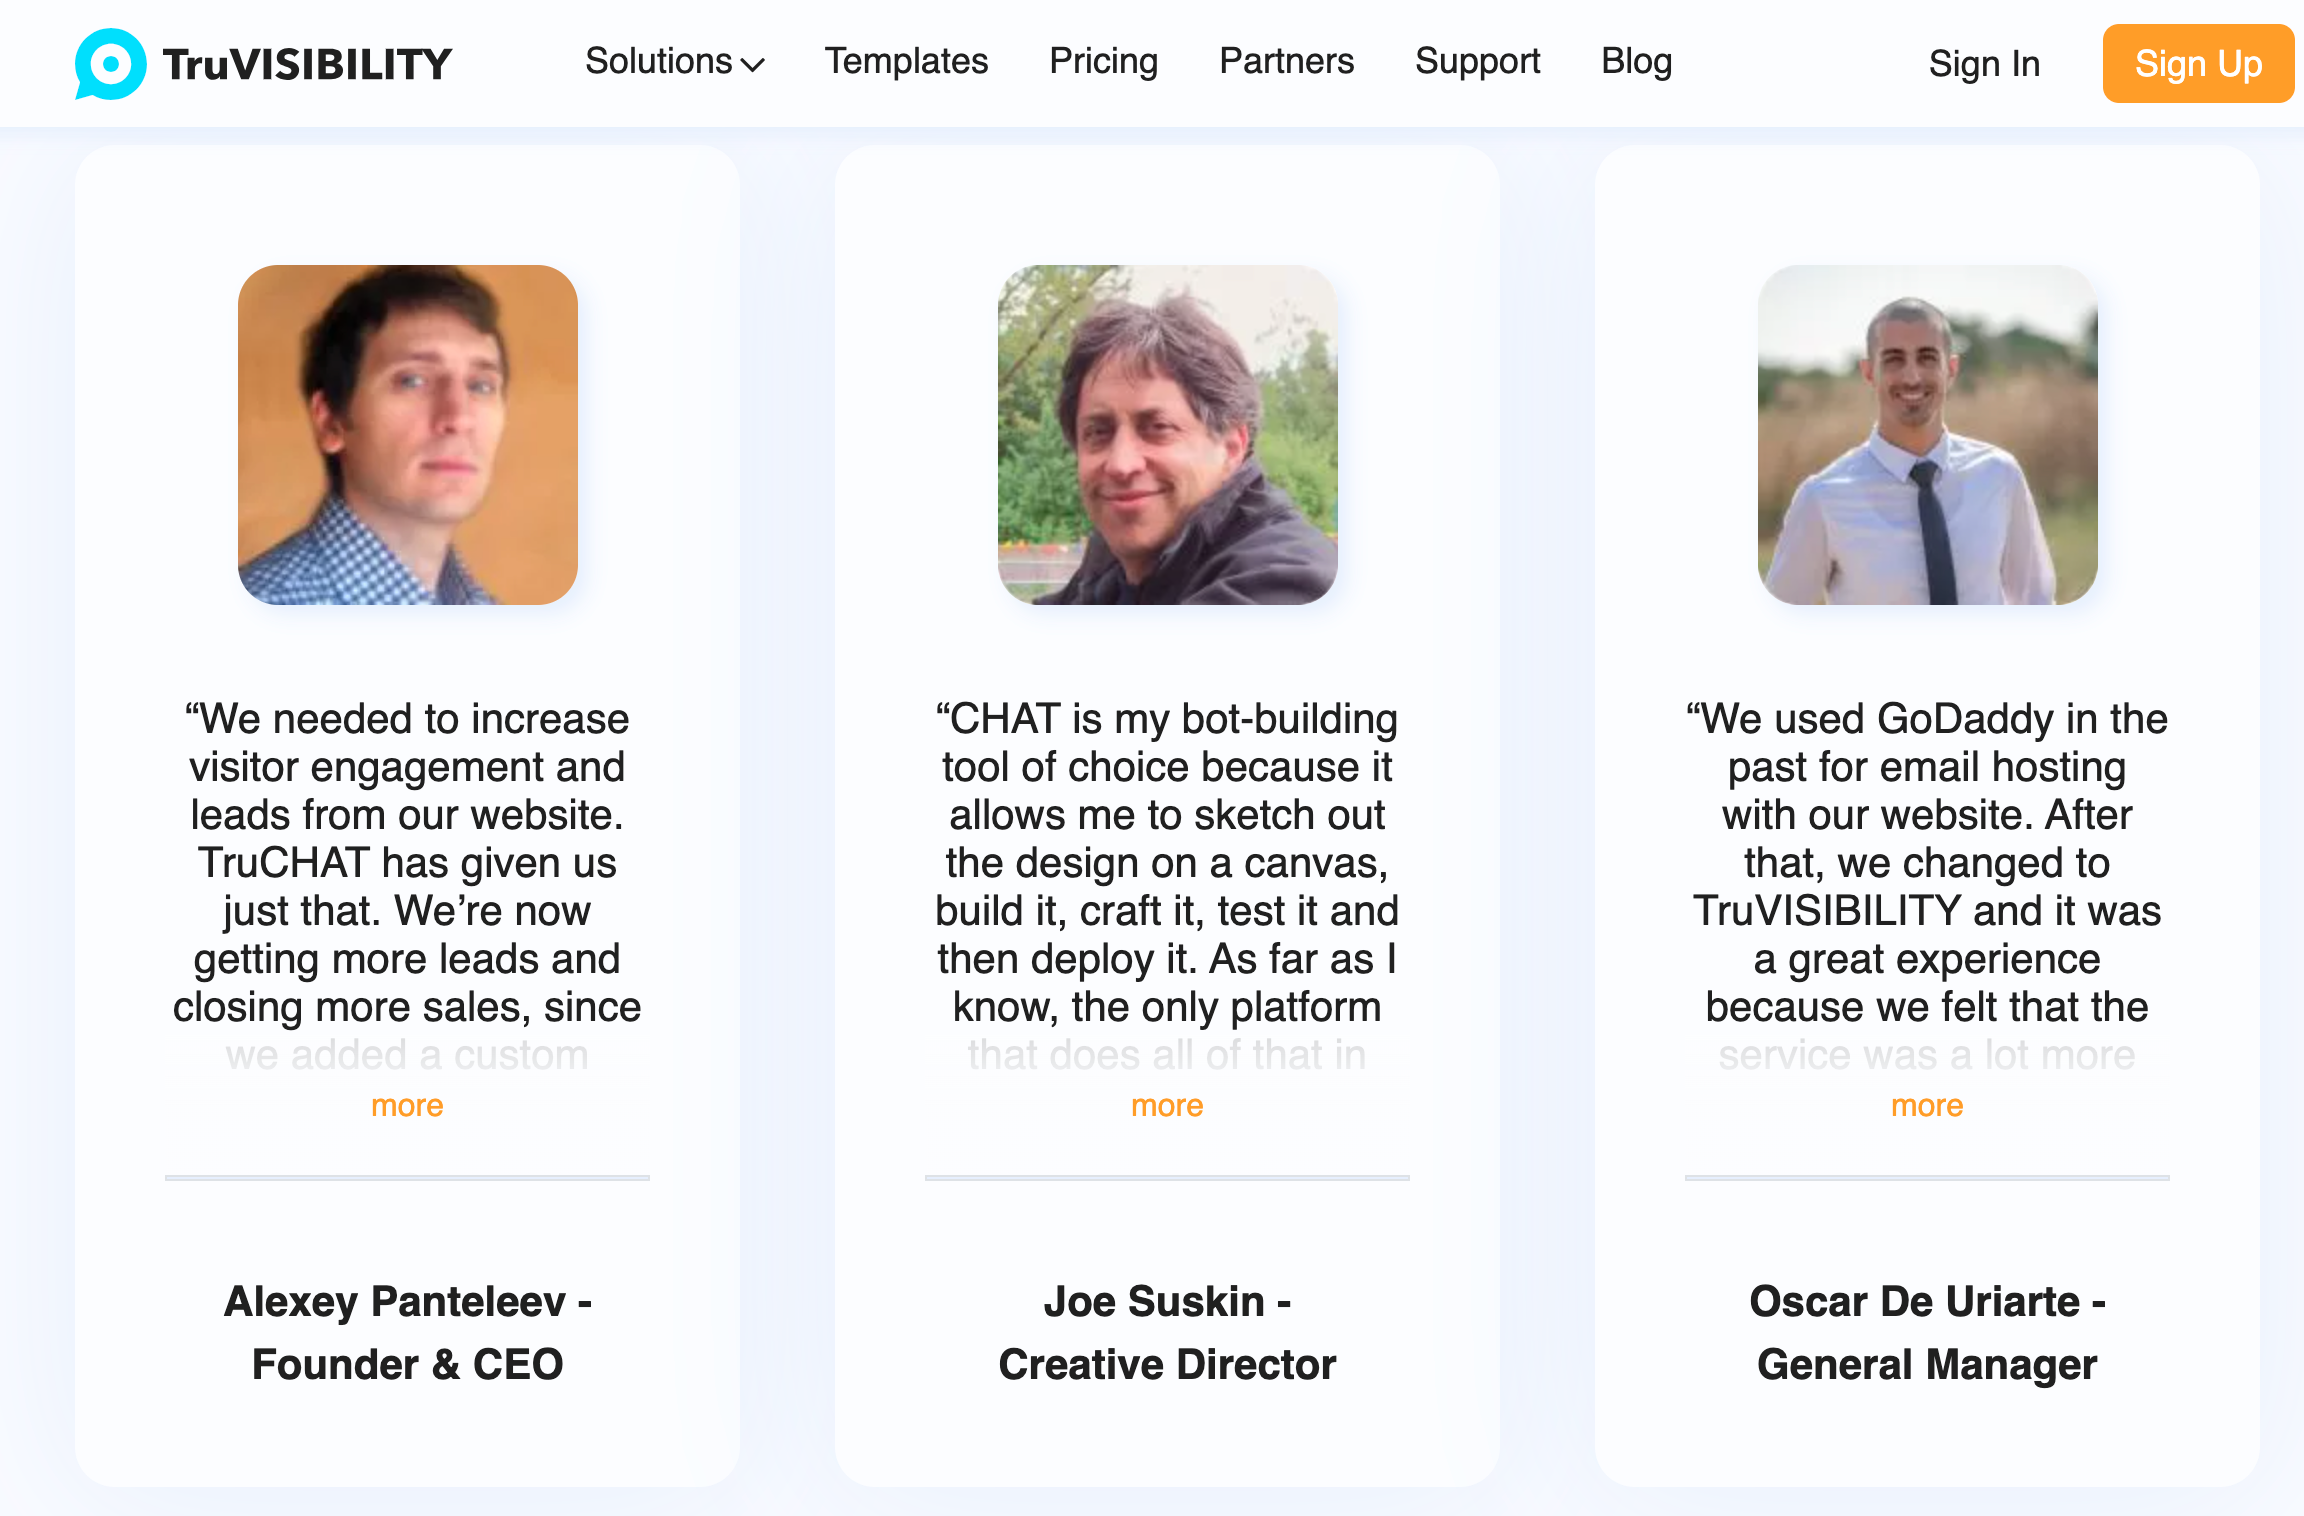 TruVISIBILITY's website showcases reviews of happy clients.